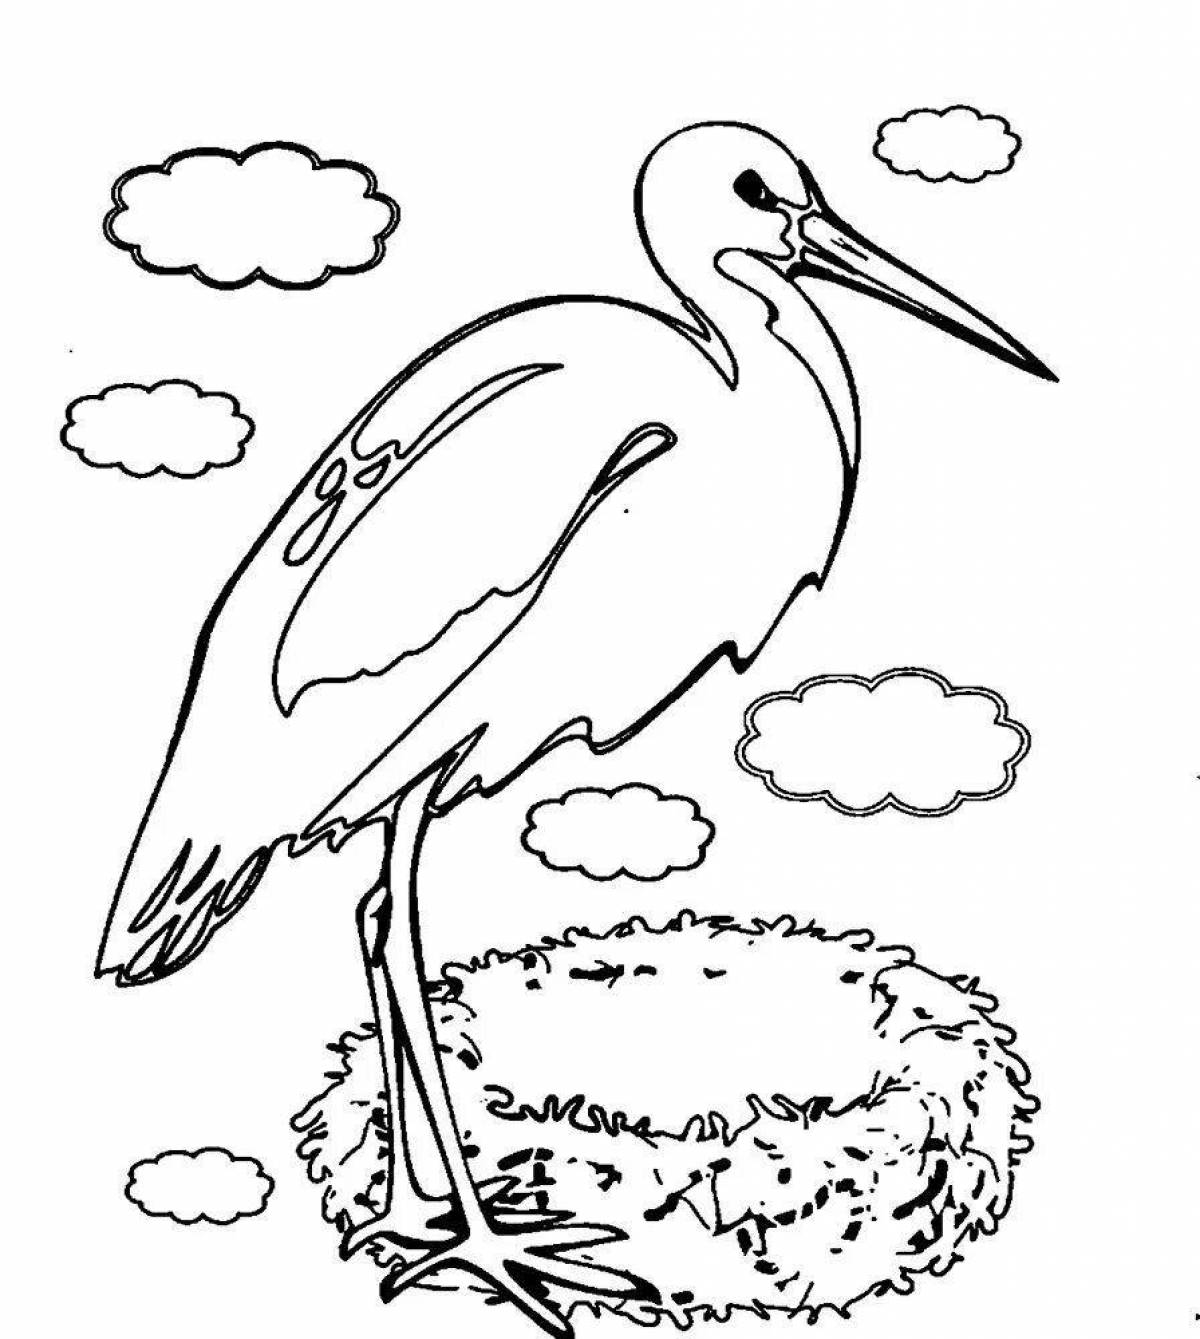 Wonderful migratory birds coloring page